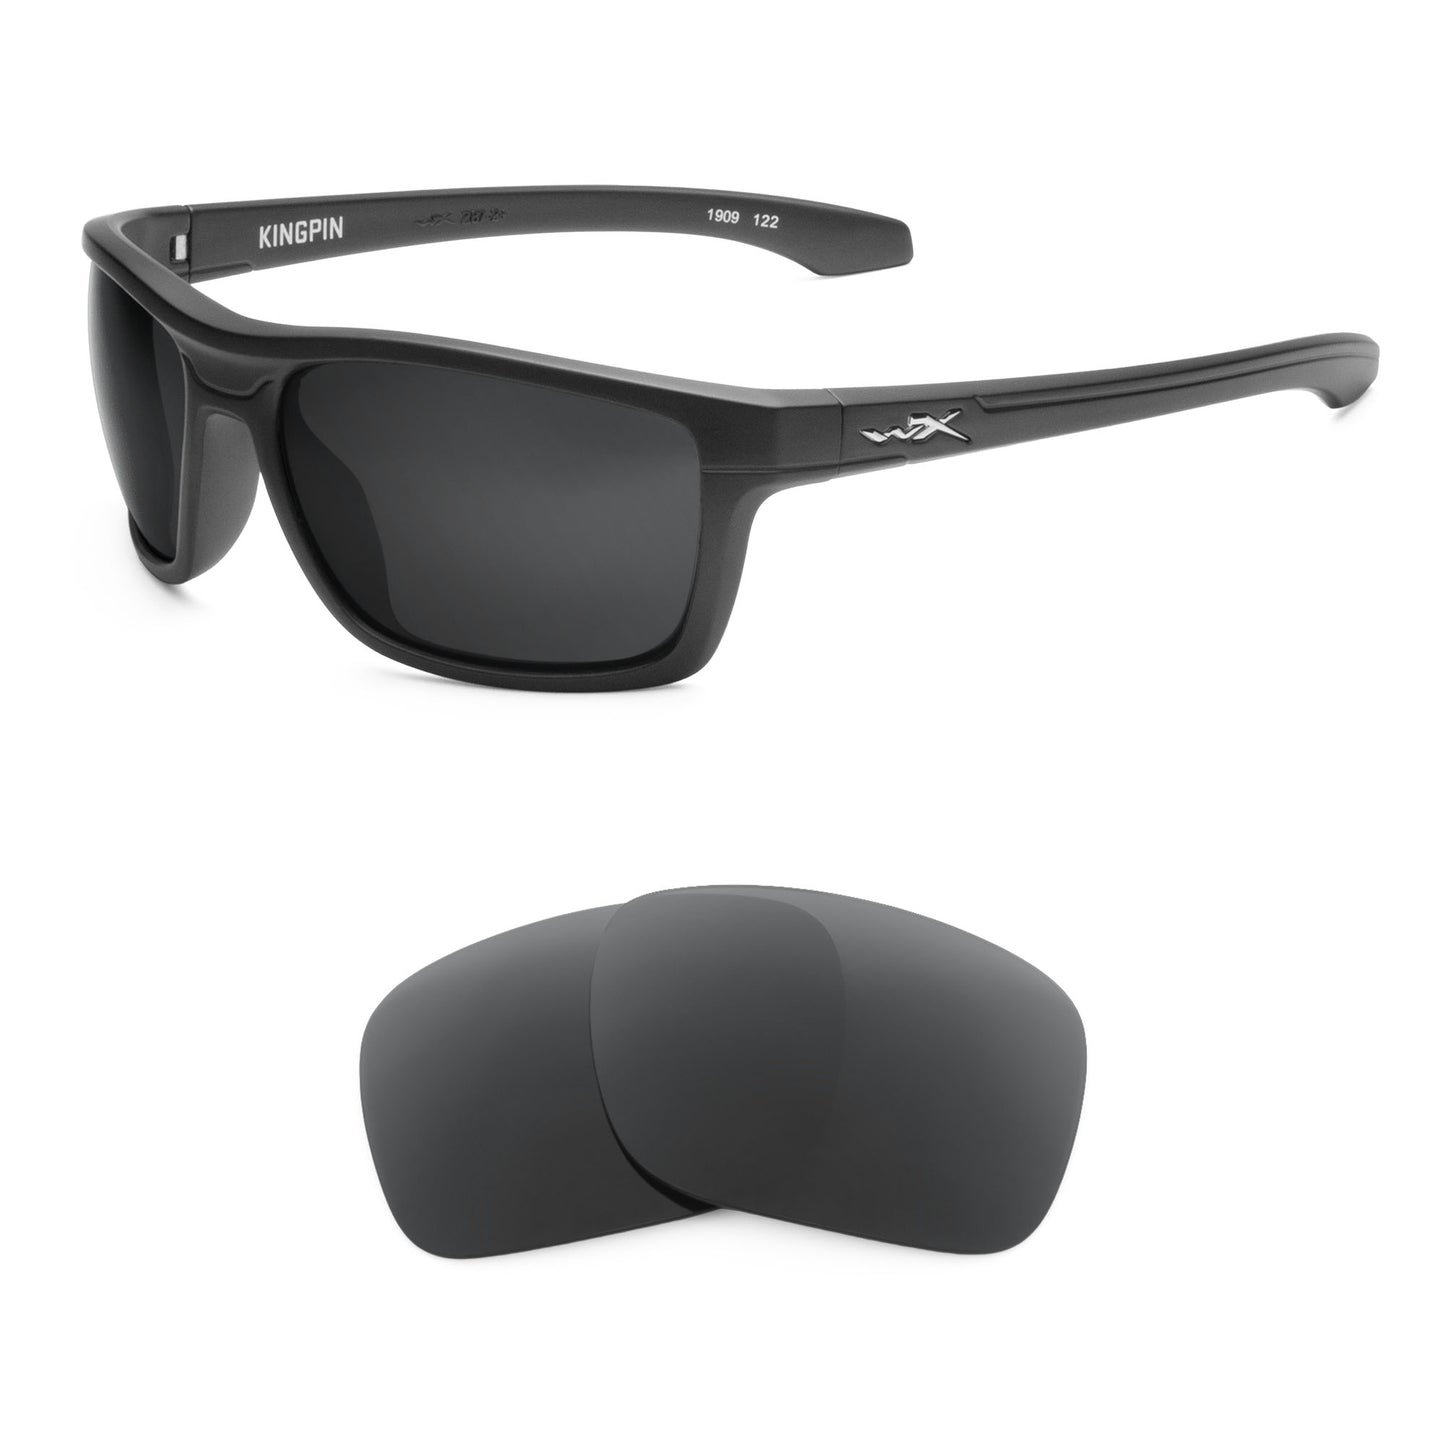 Wiley X Kingpin sunglasses with replacement lenses